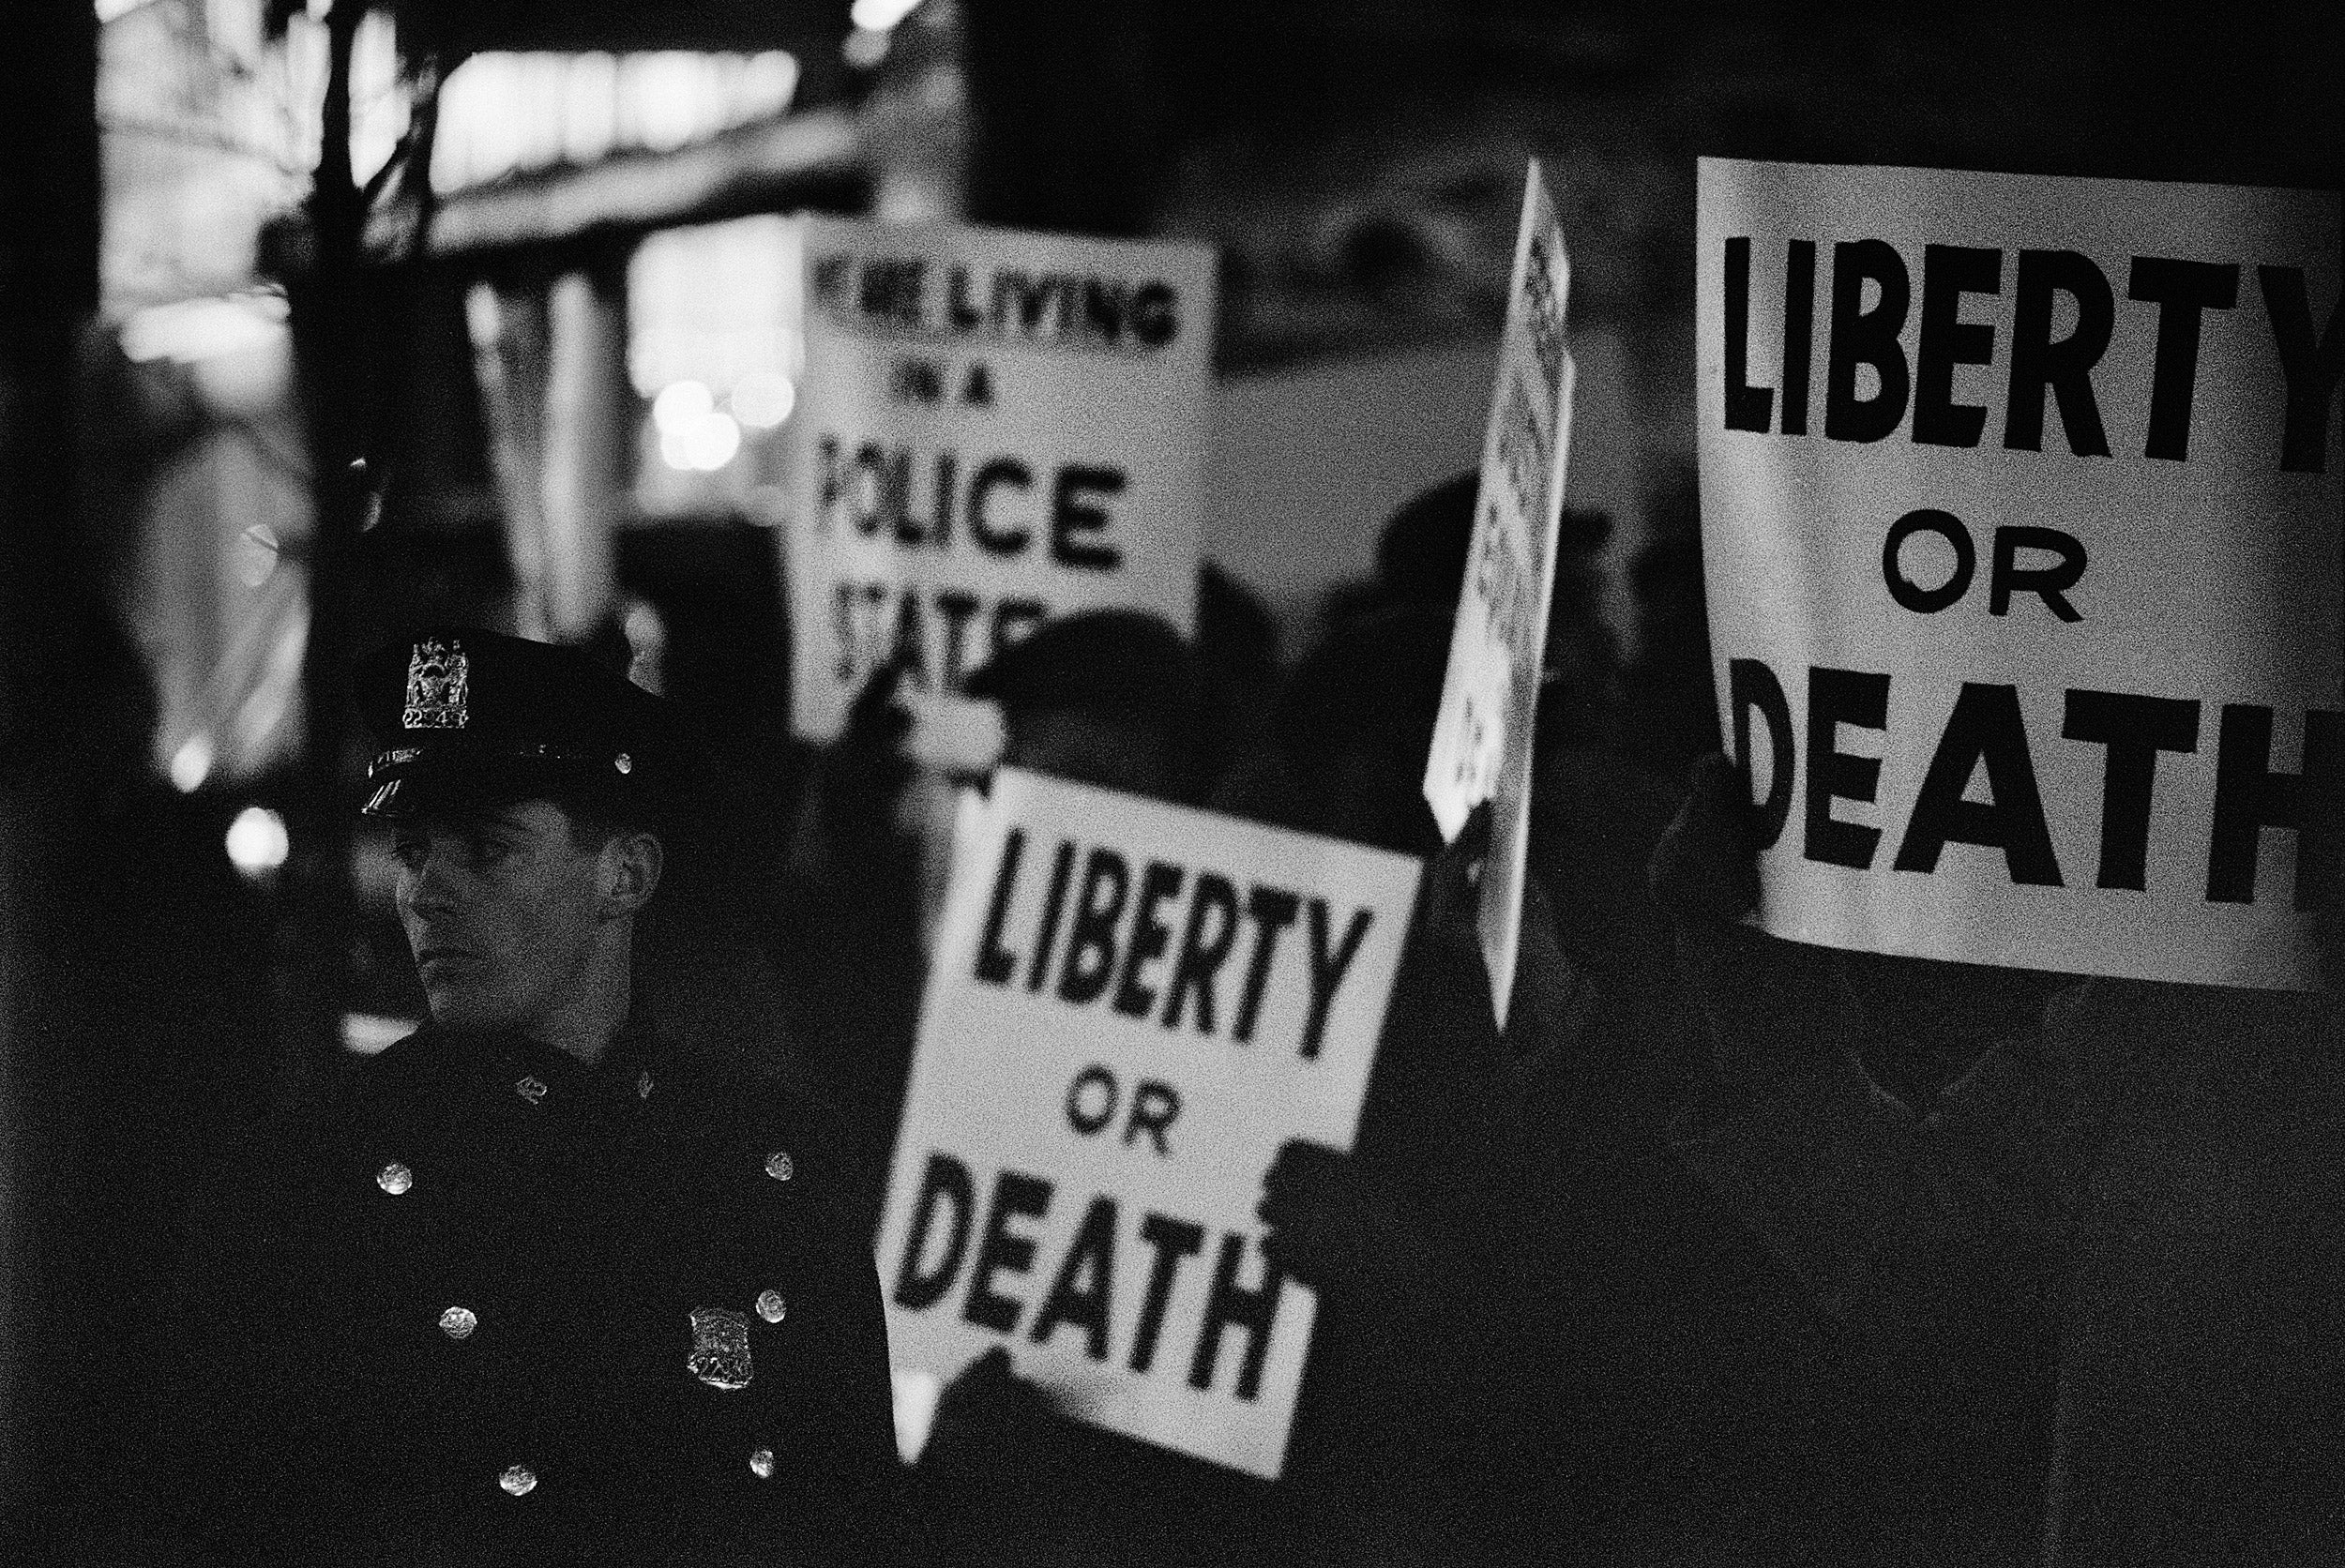 "Liberty or death" on posters in the background, a police officer in the foreground